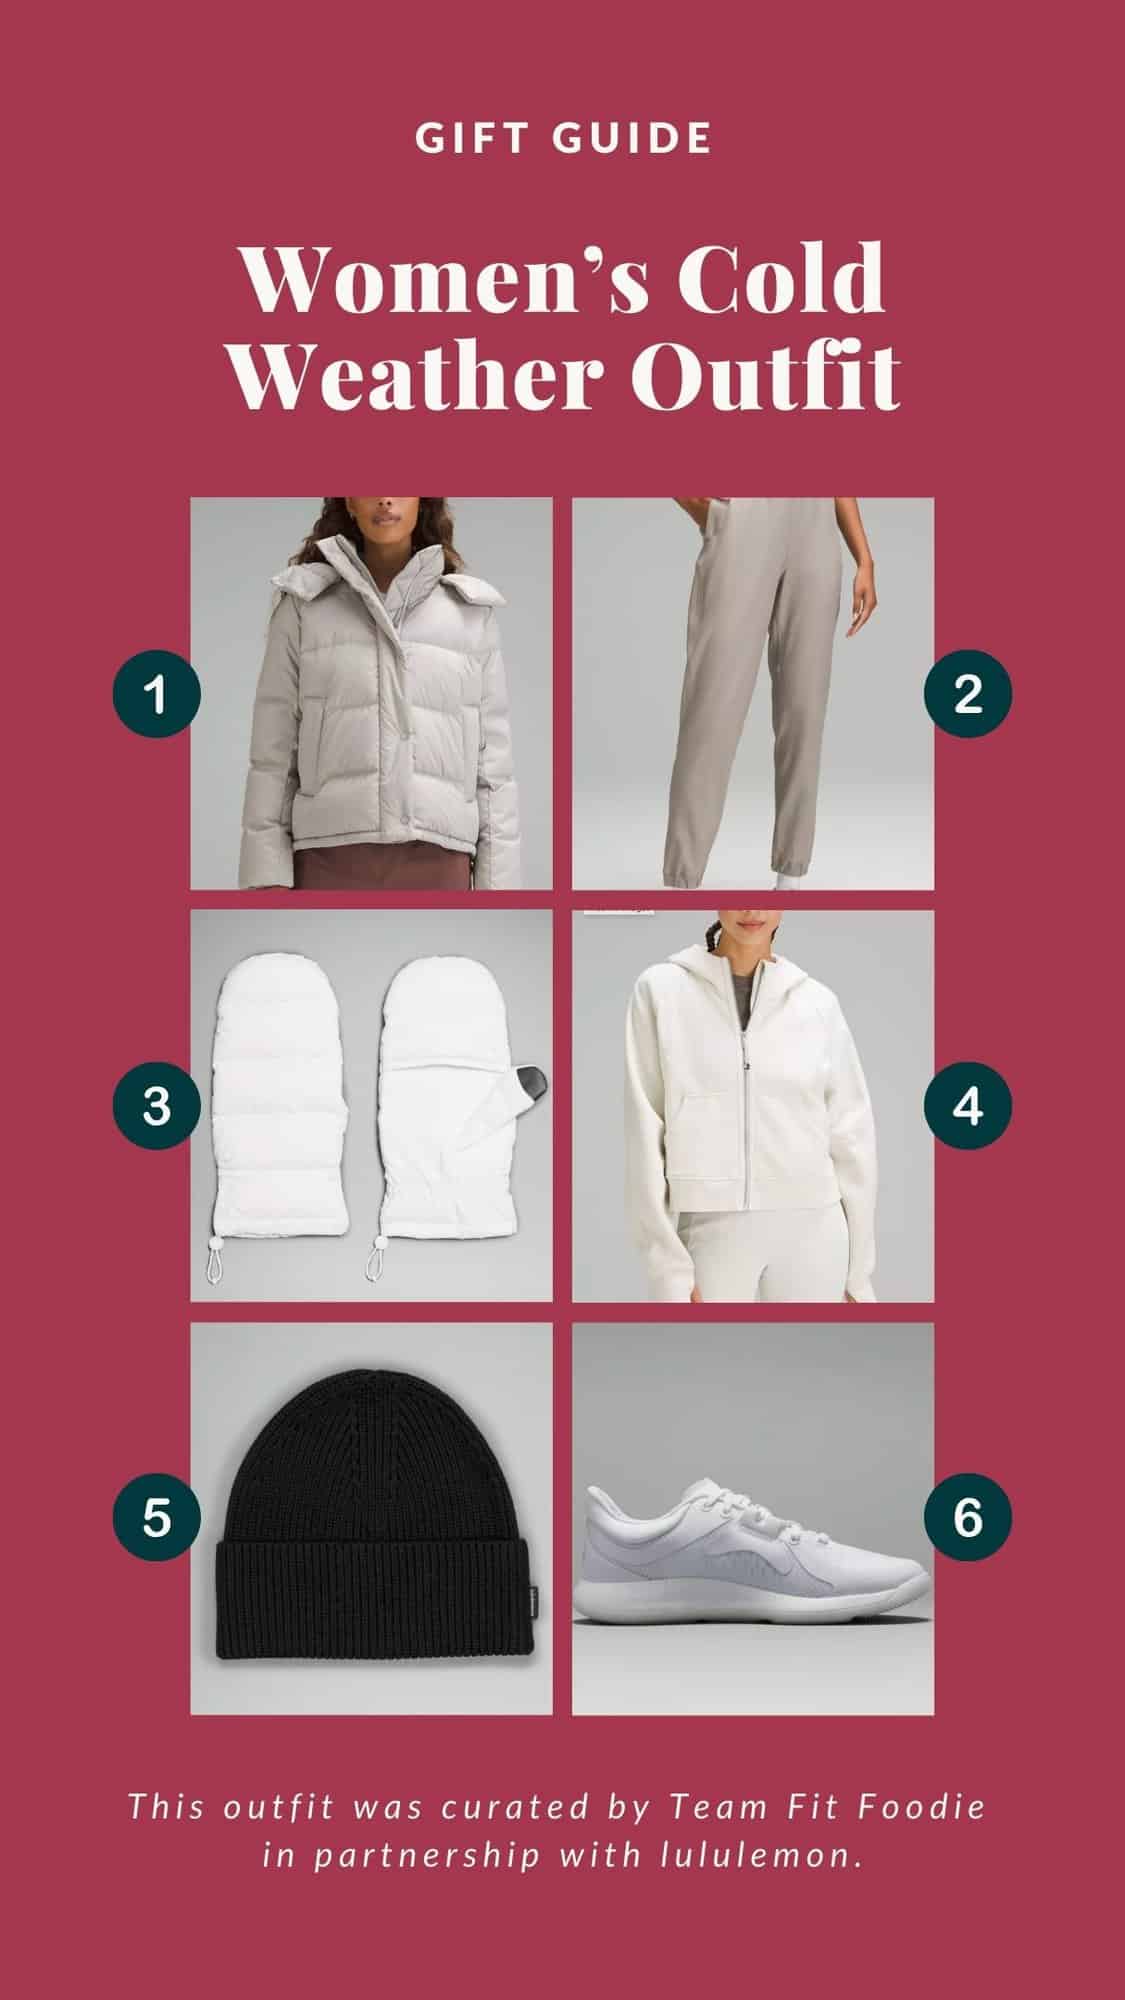 Women's cold weather outfit gift guide.